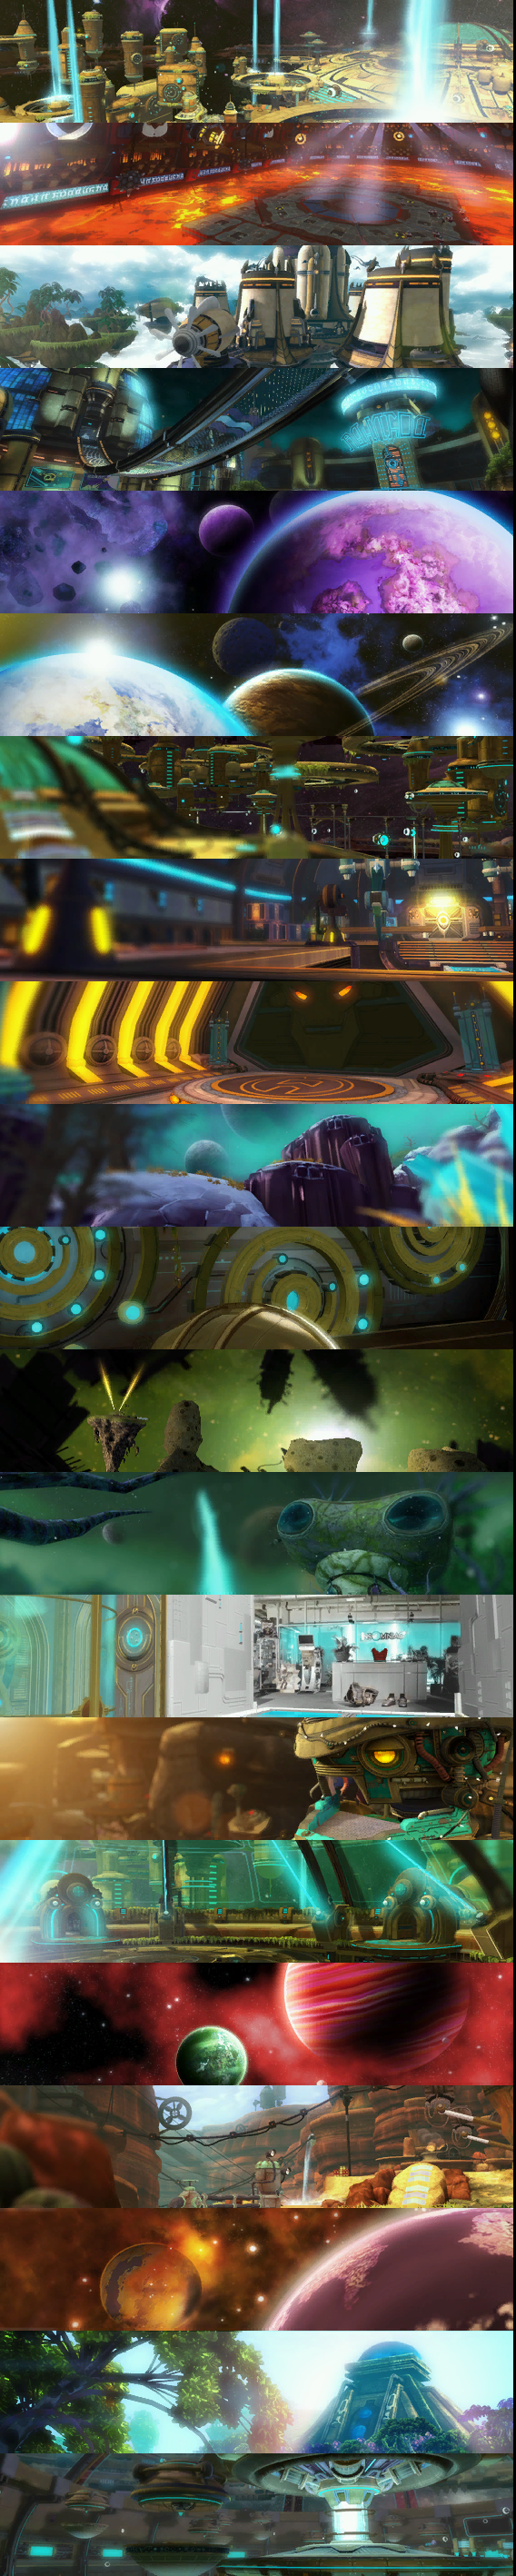 Ratchet & Clank Future: A Crack in Time - Location Banners